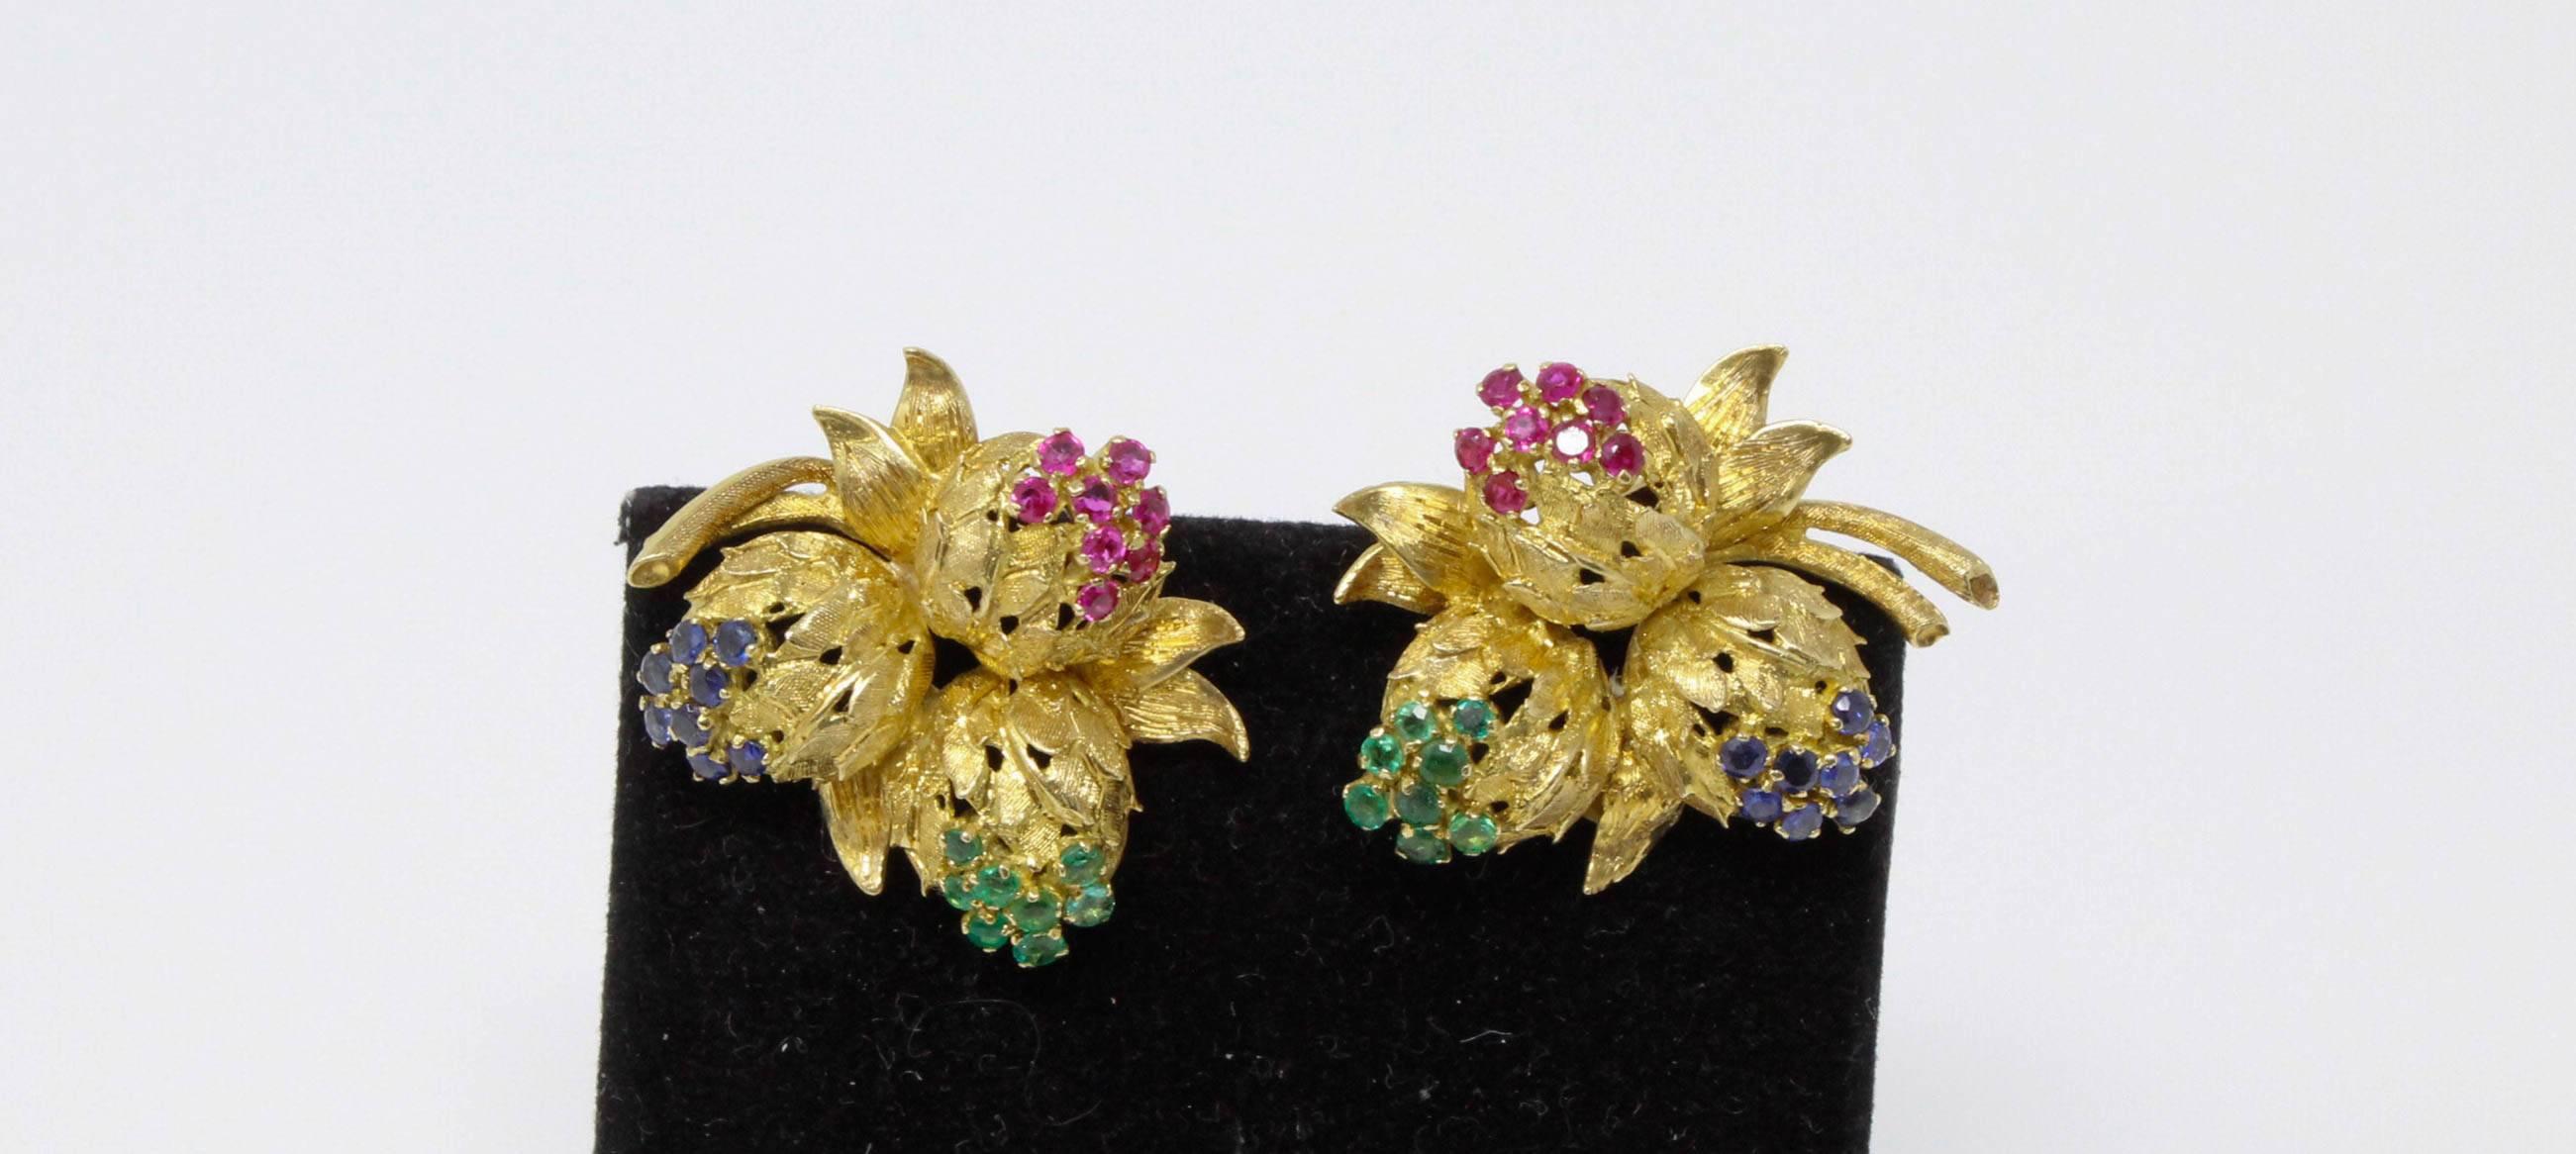 Sapphire, ruby, and emerald floral earring set in 18 karat yellow gold.